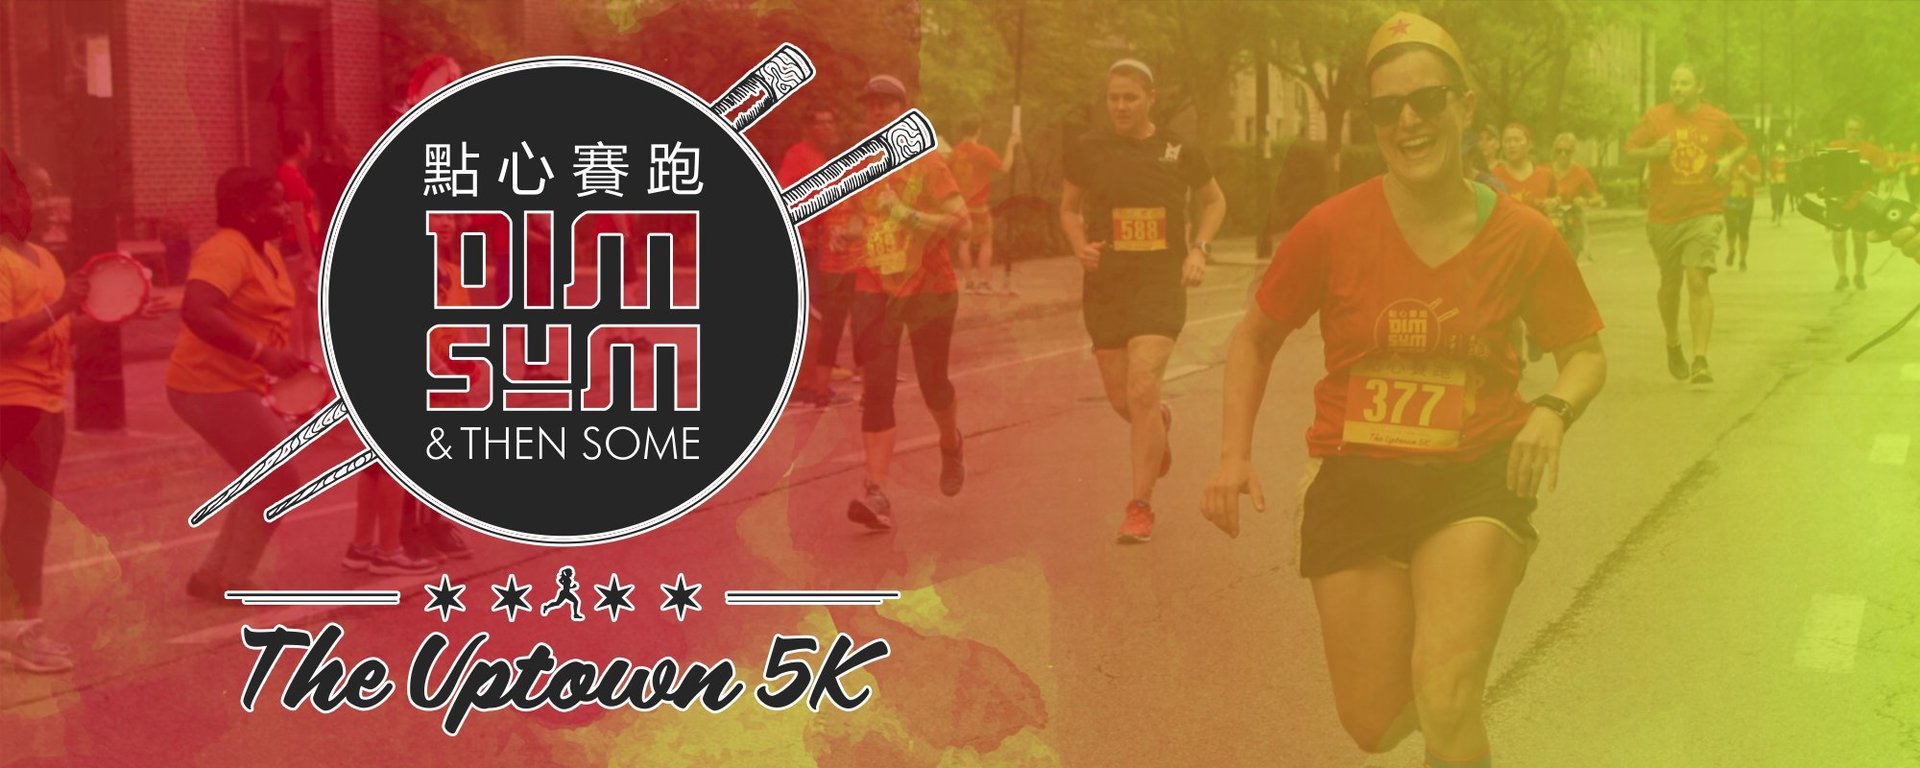 Dim Sum & Then Some: The Uptown 5K & 10K, Chicago, Illinois, United States